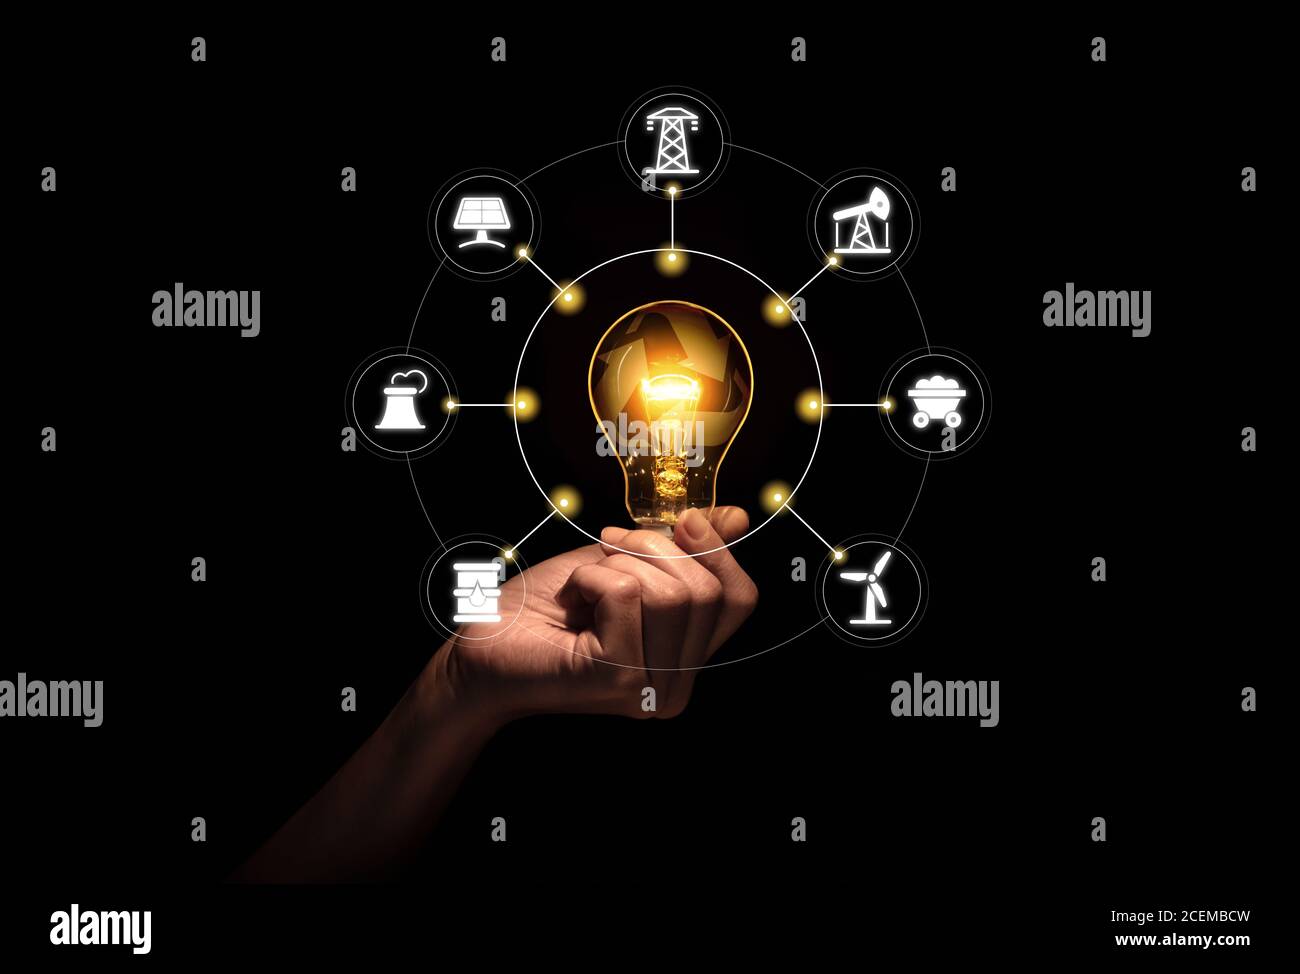 Hand holding light bulb with recycle symbol inside against with icons energy sources for renewable, sustainable development. Stock Photo